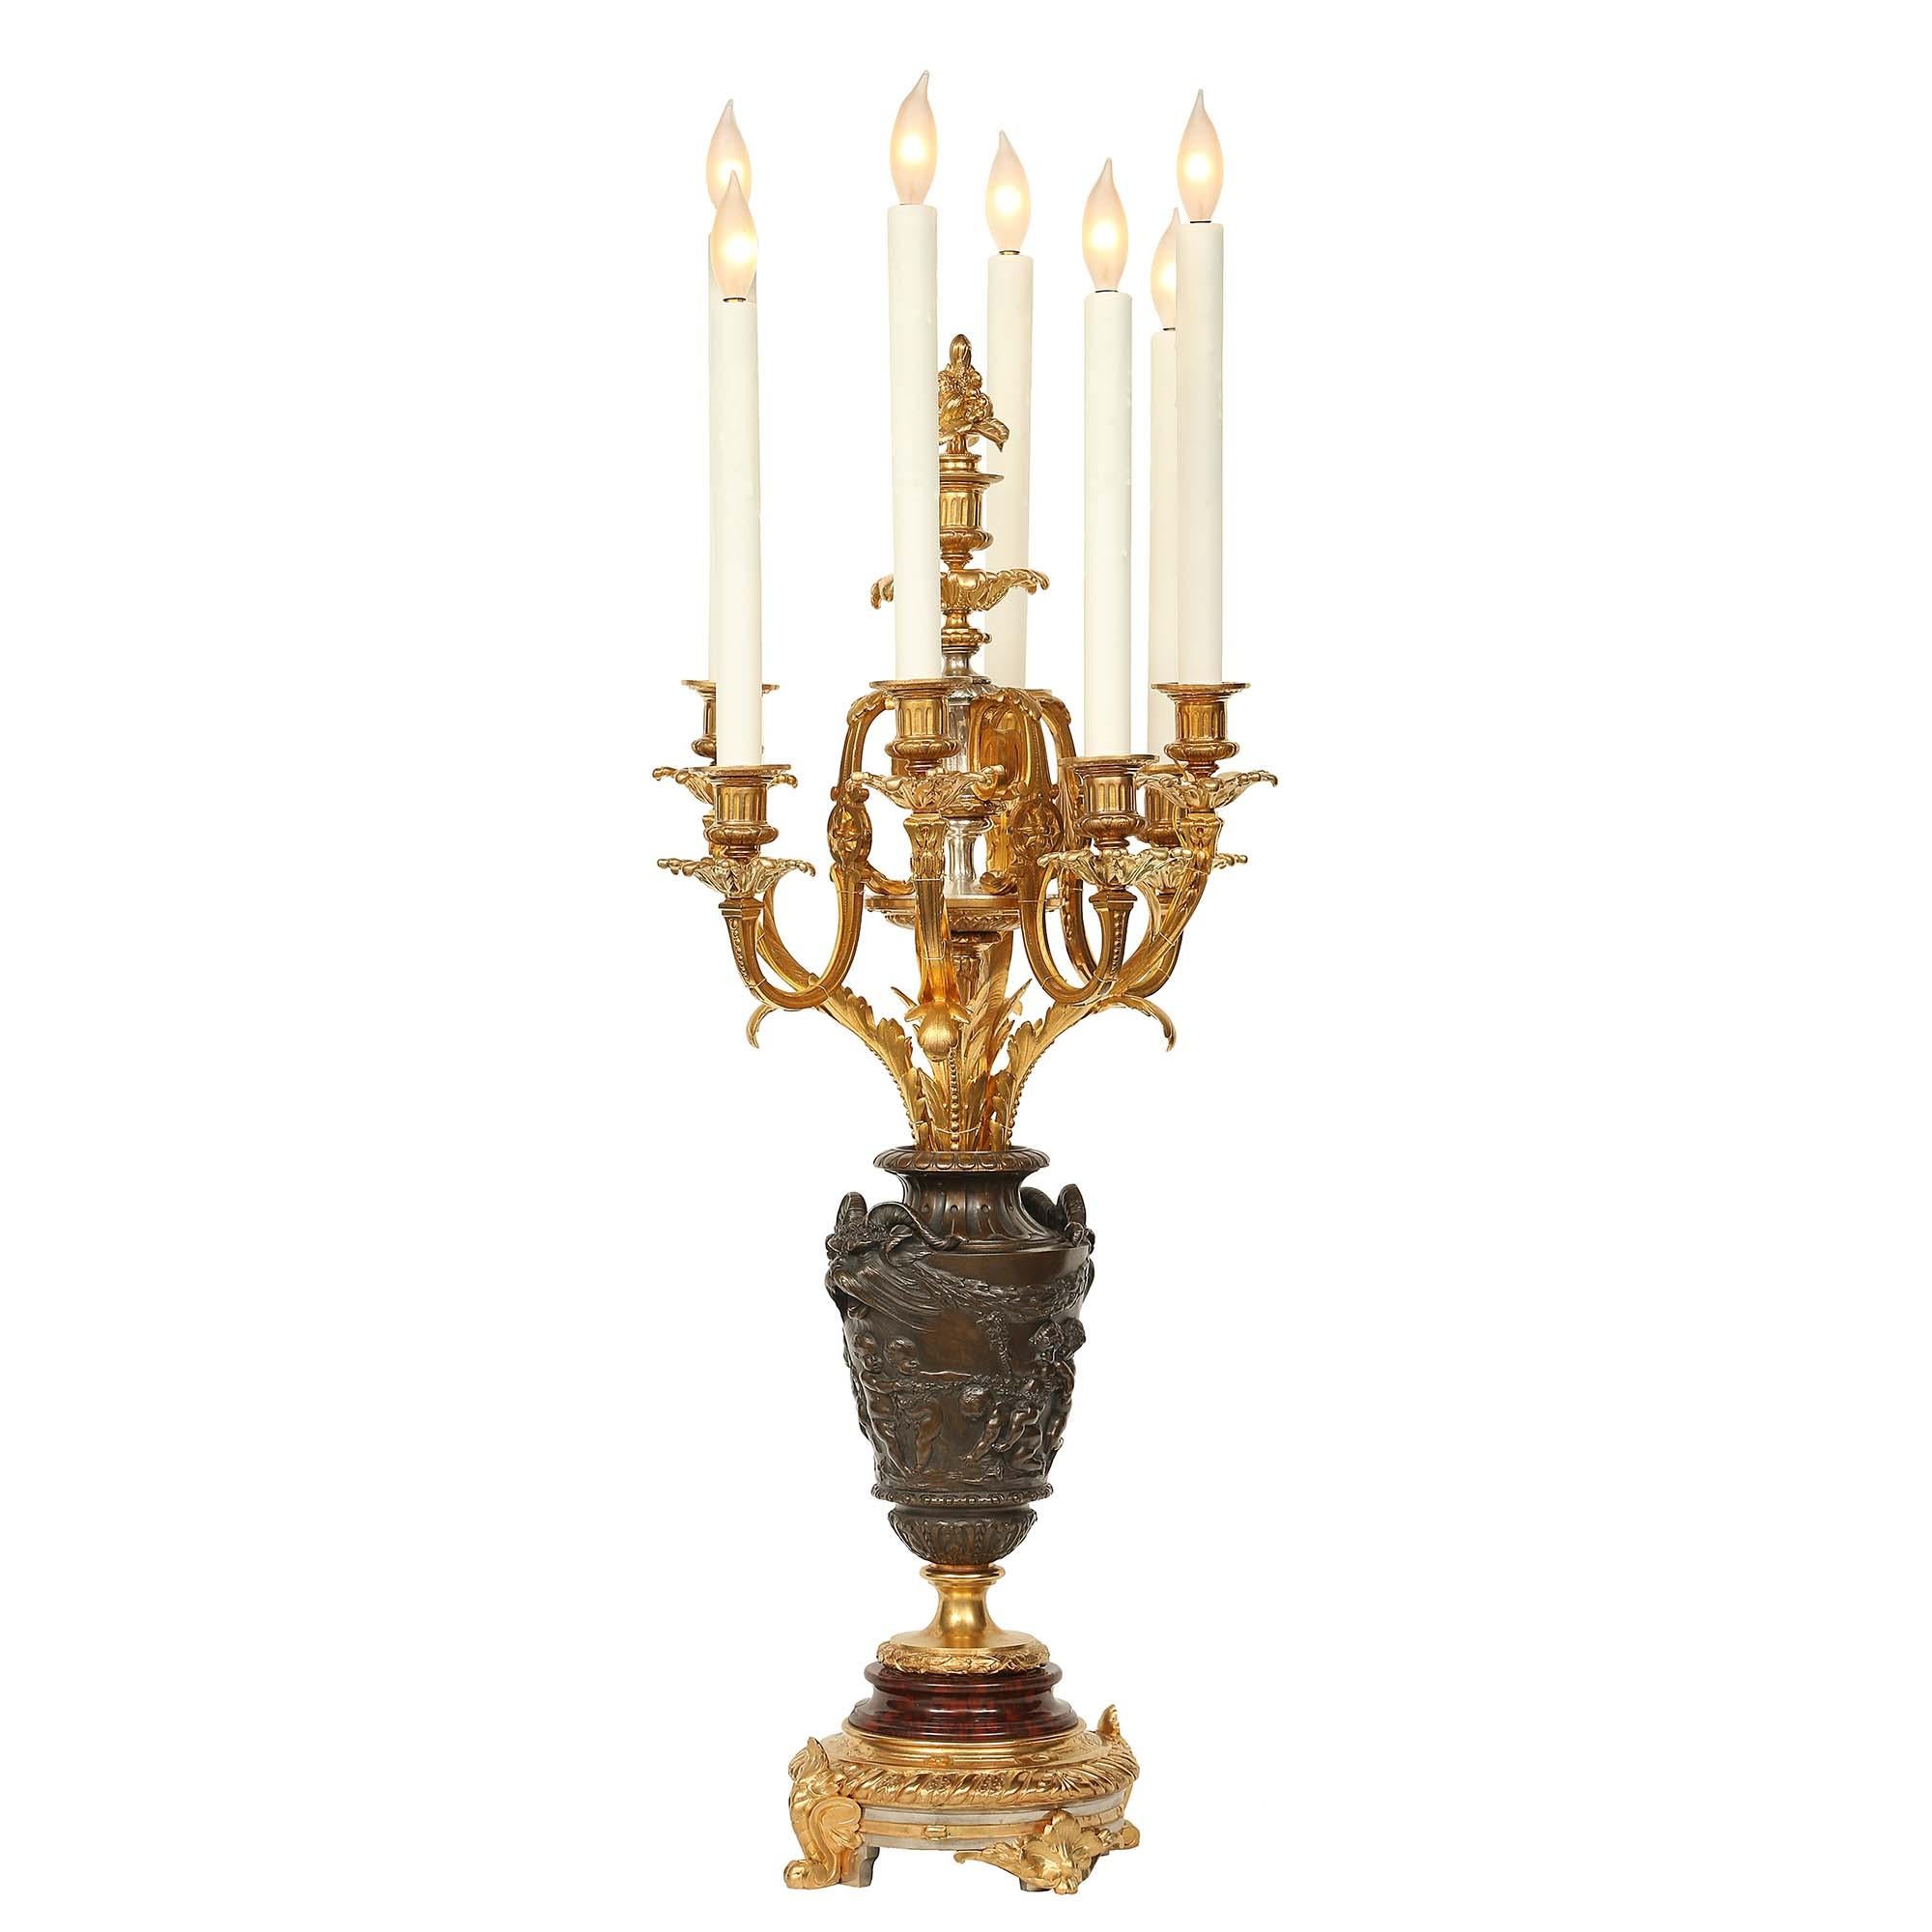 An exquisite pair of 19th century Louis XVI st. ormolu candelabras, attributed to F. Barbedienne. Each candelabra is raised on a circular finely chased ormolu base with acanthus leaf styled supports. Above is a moulded Rouge Griotte base below the